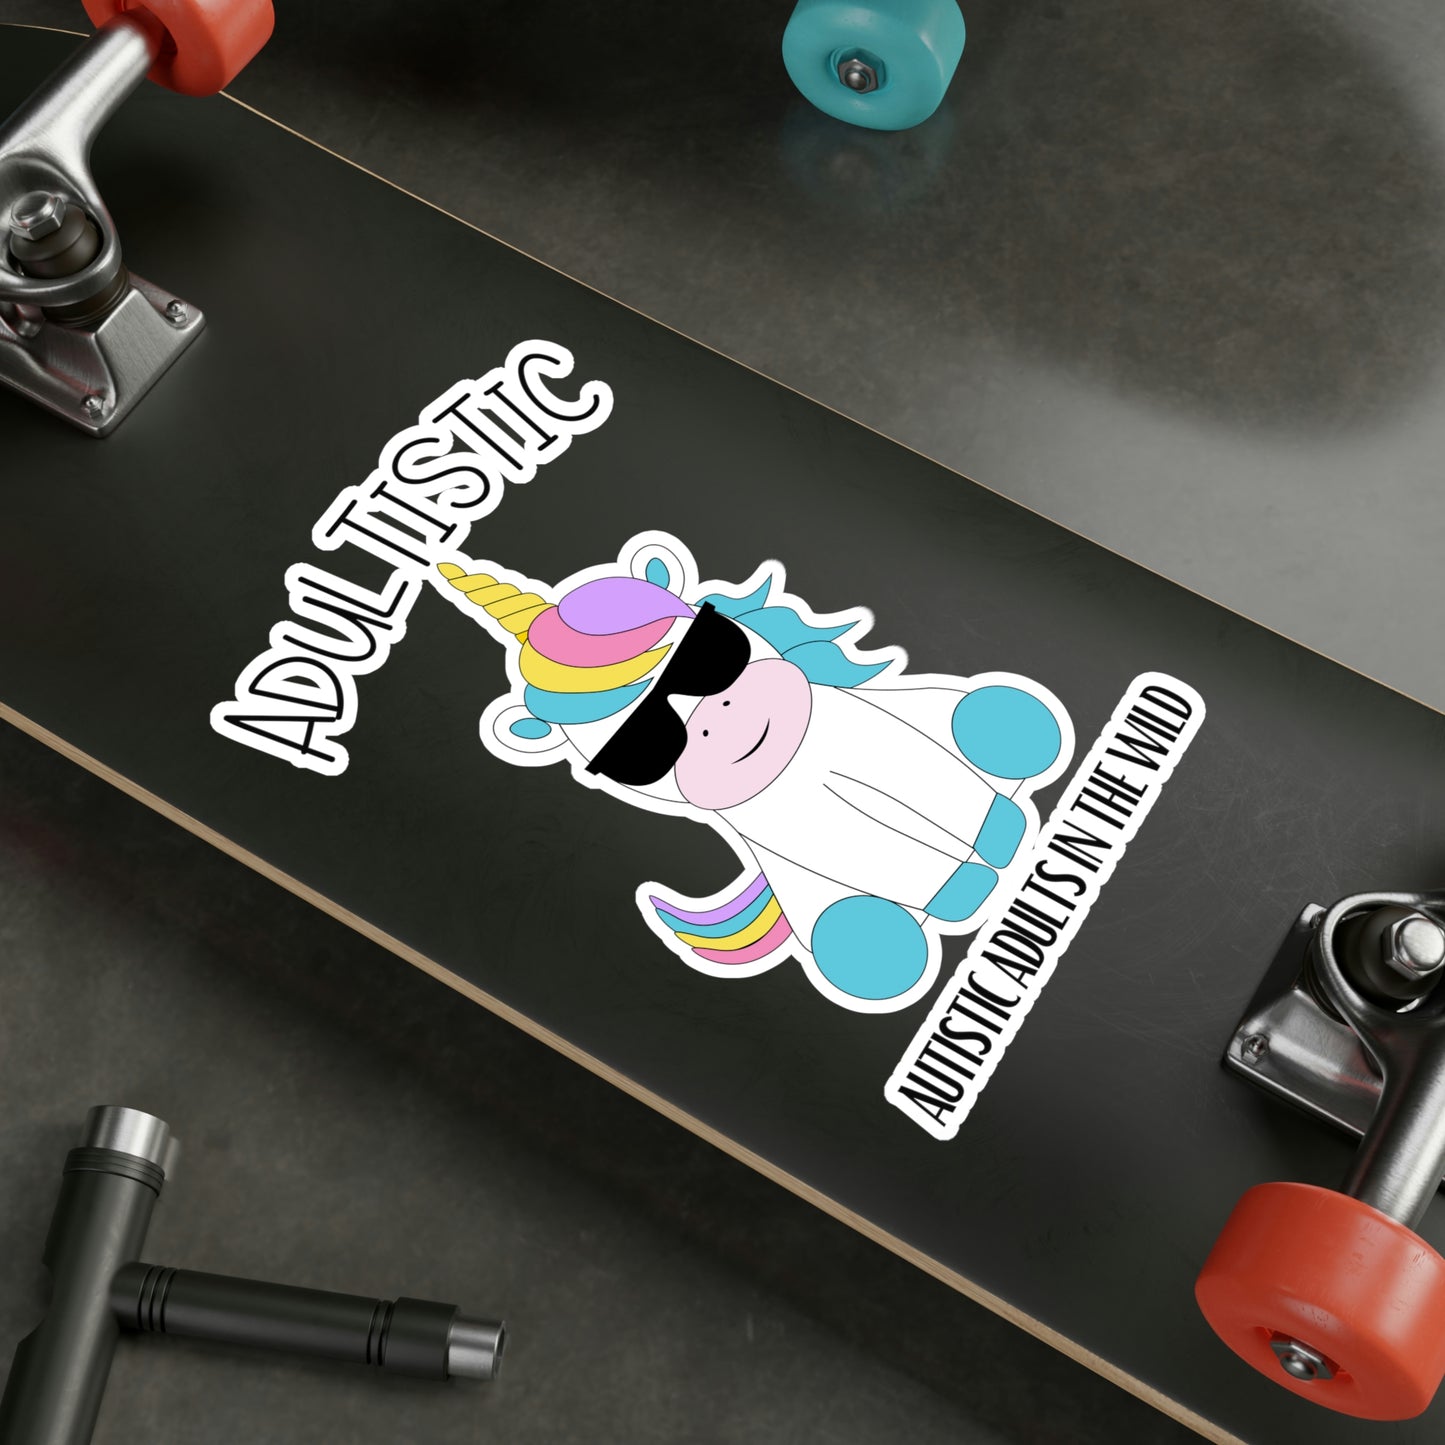 "Autistic Adults In The Wild" Shady Unicorn Kiss-Cut Vinyl Decals